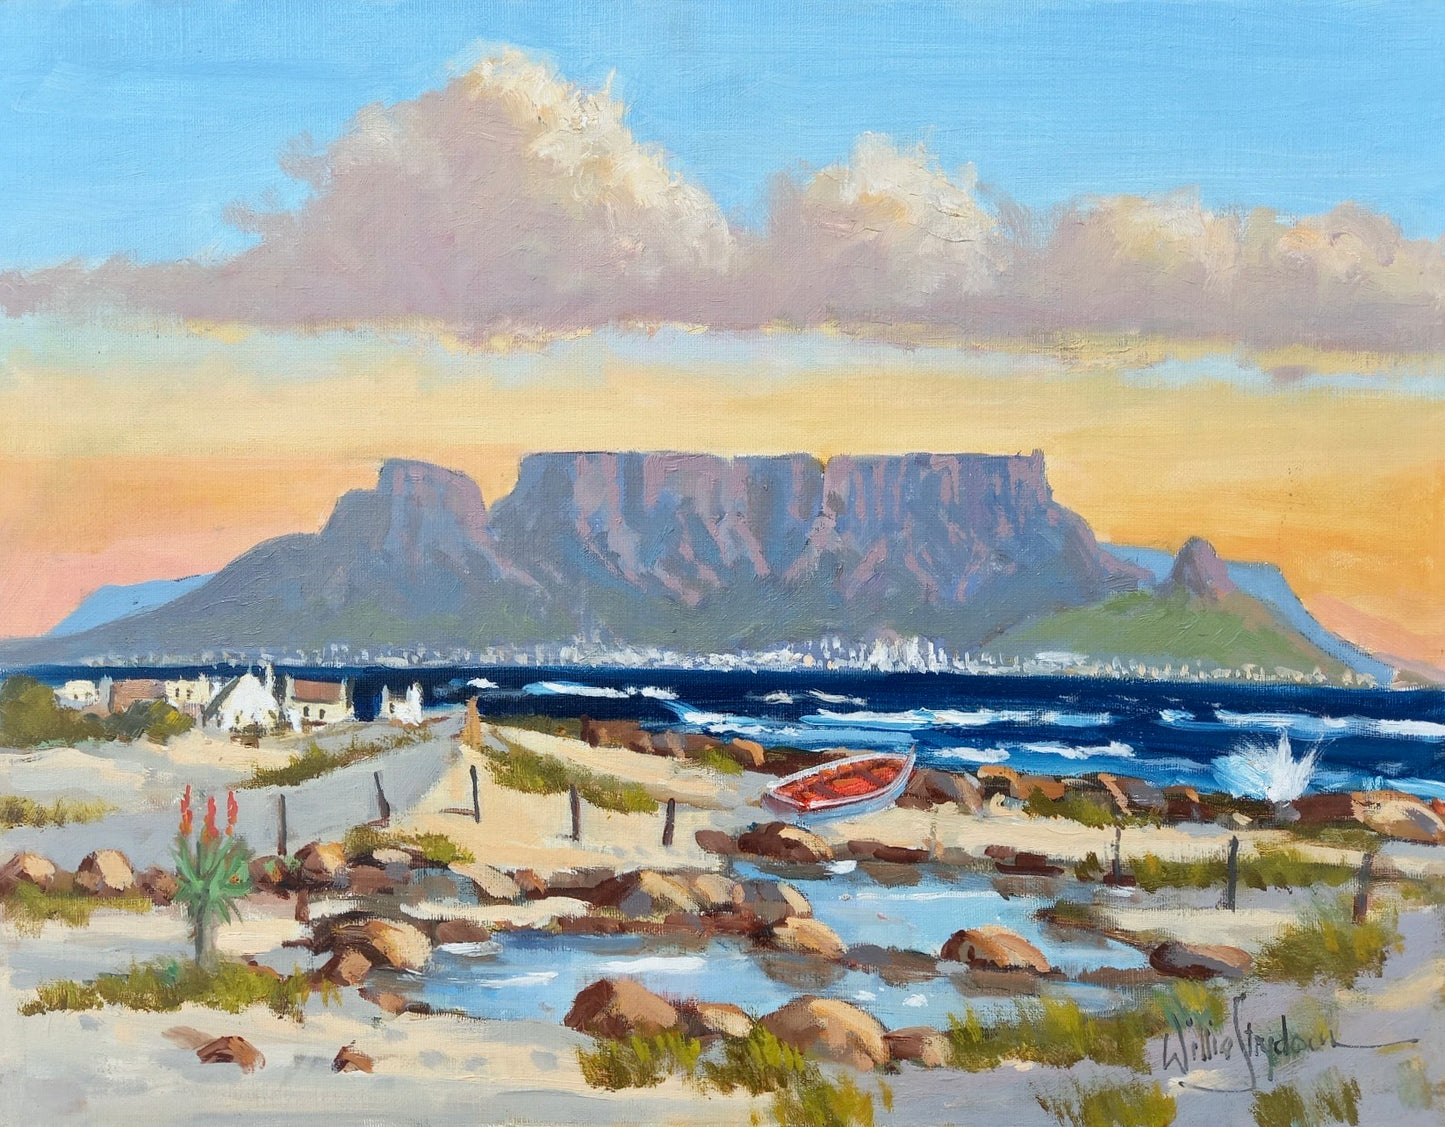 Oil on Canvas Panel by Willie Strydom